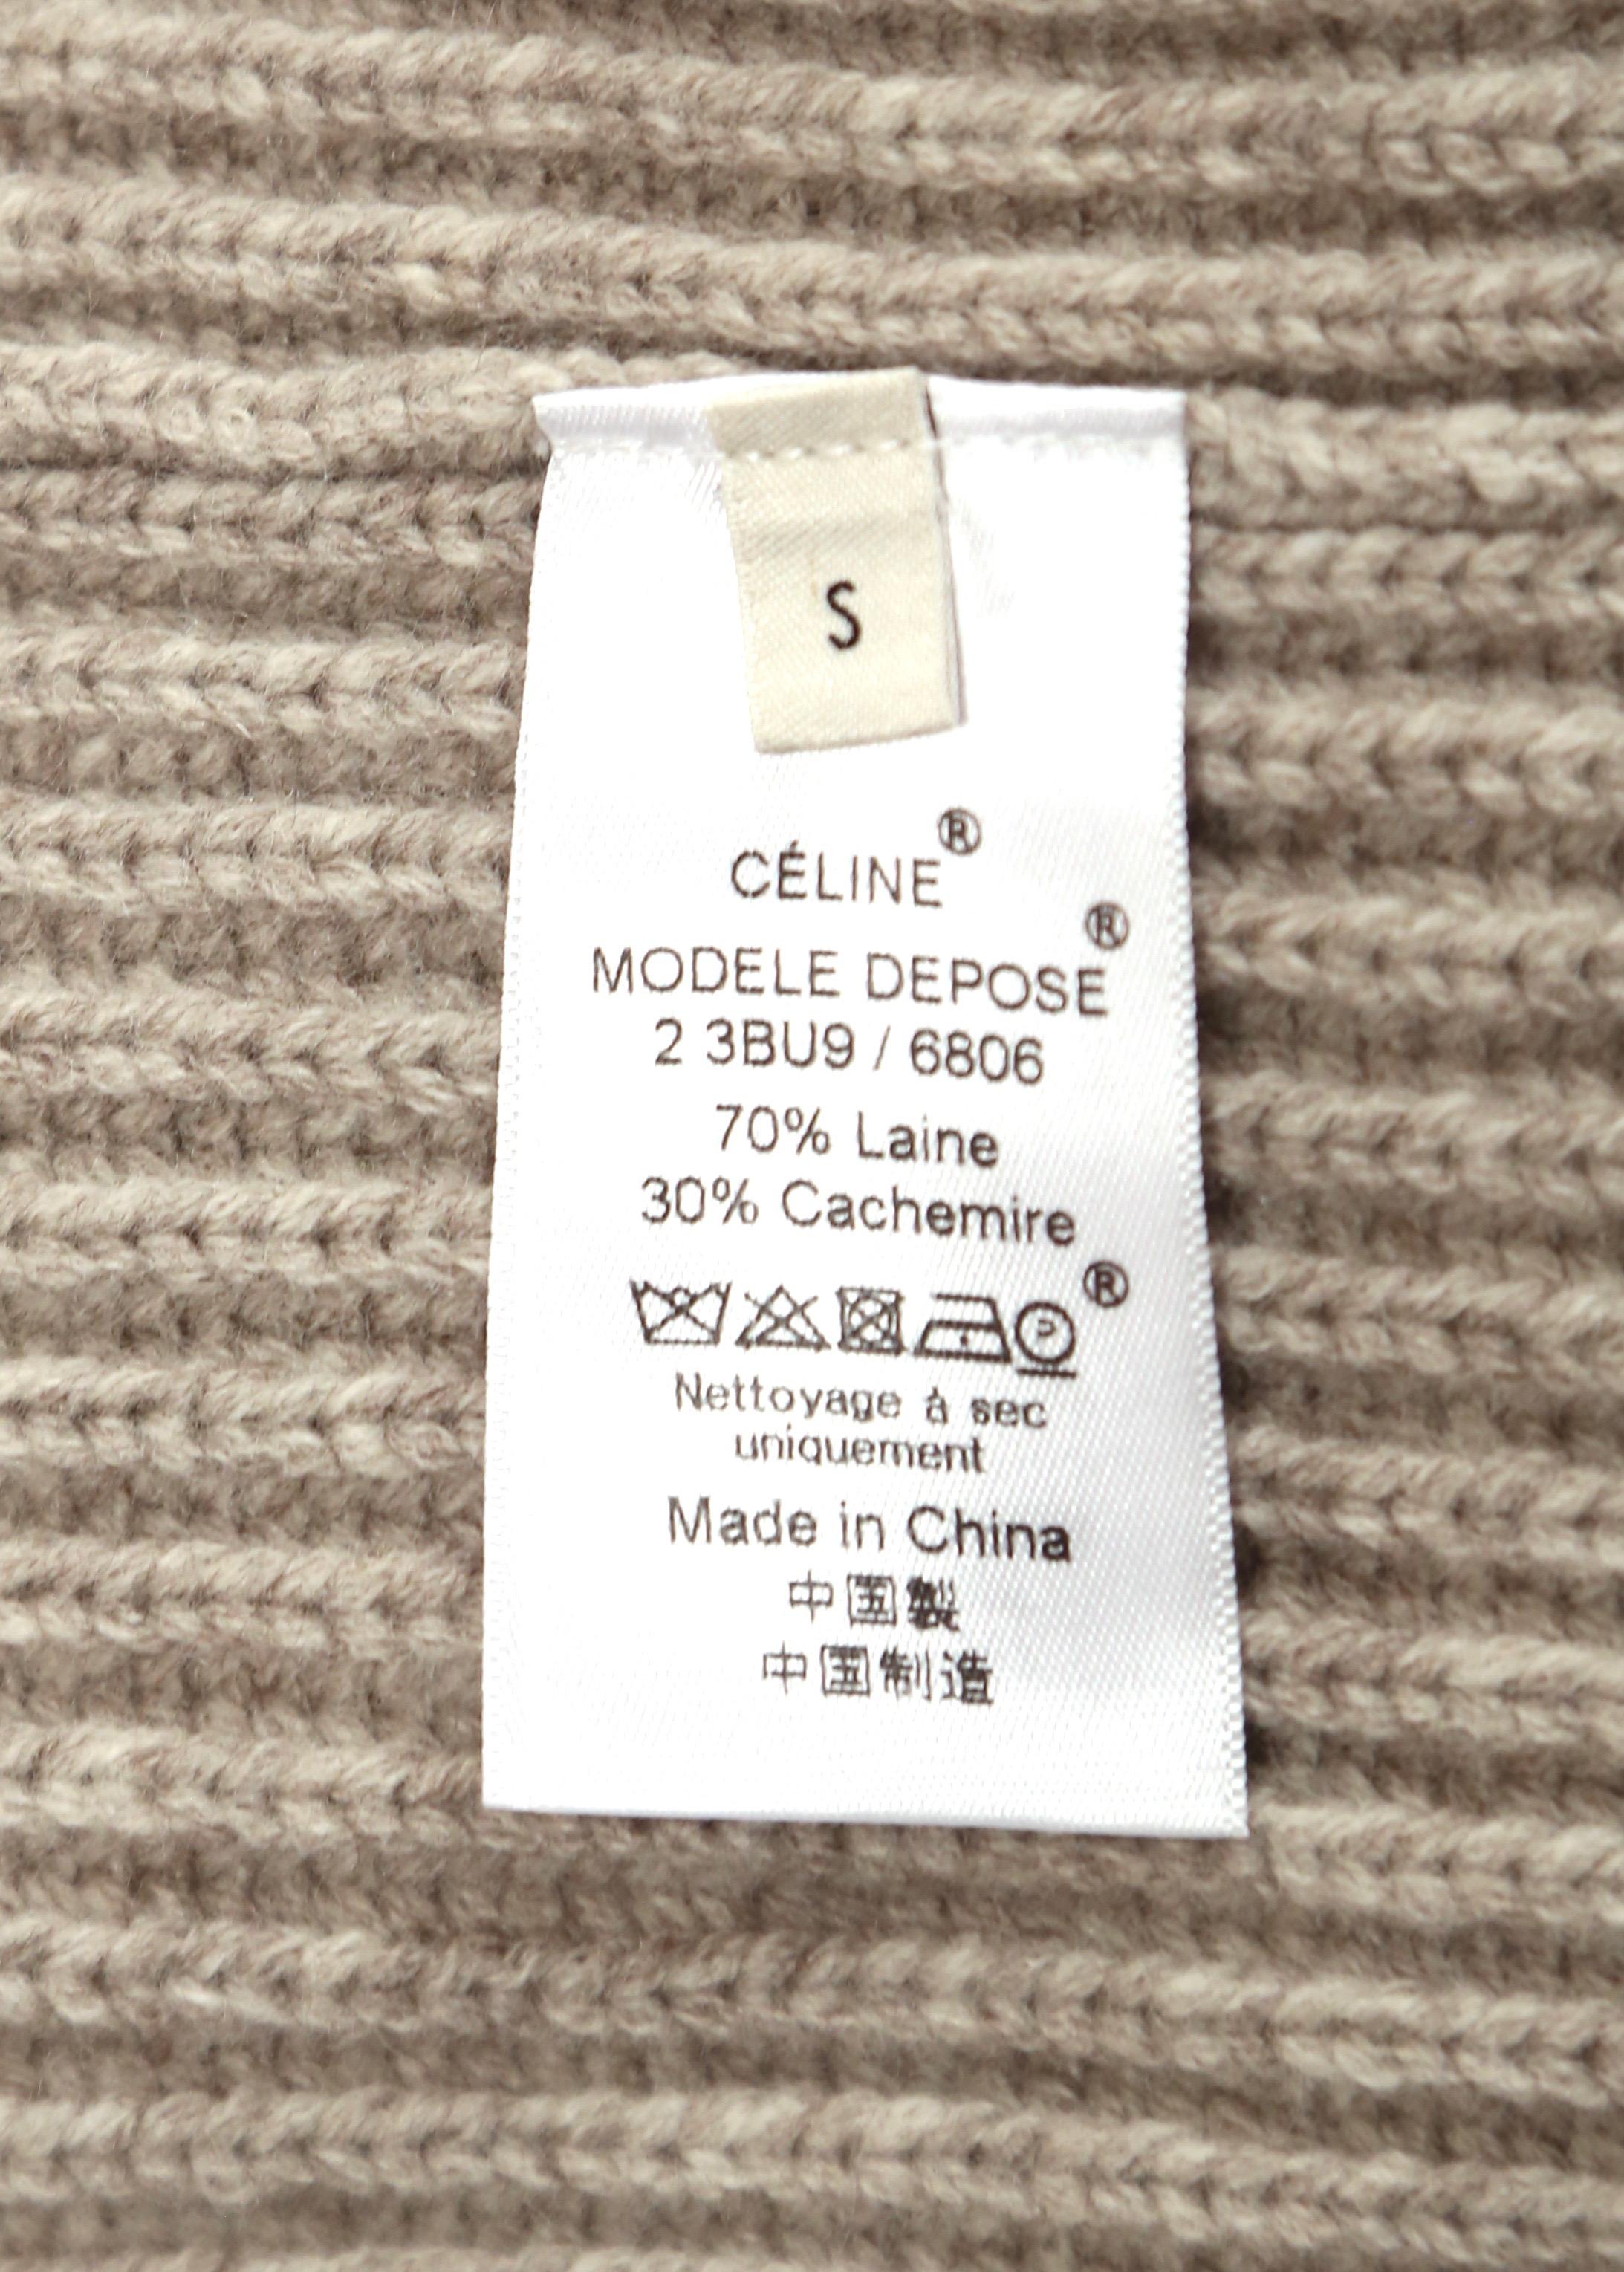 CELINE by PHOEBE PHILO wool and cashmere draped sweater with cut out back - NEW 1